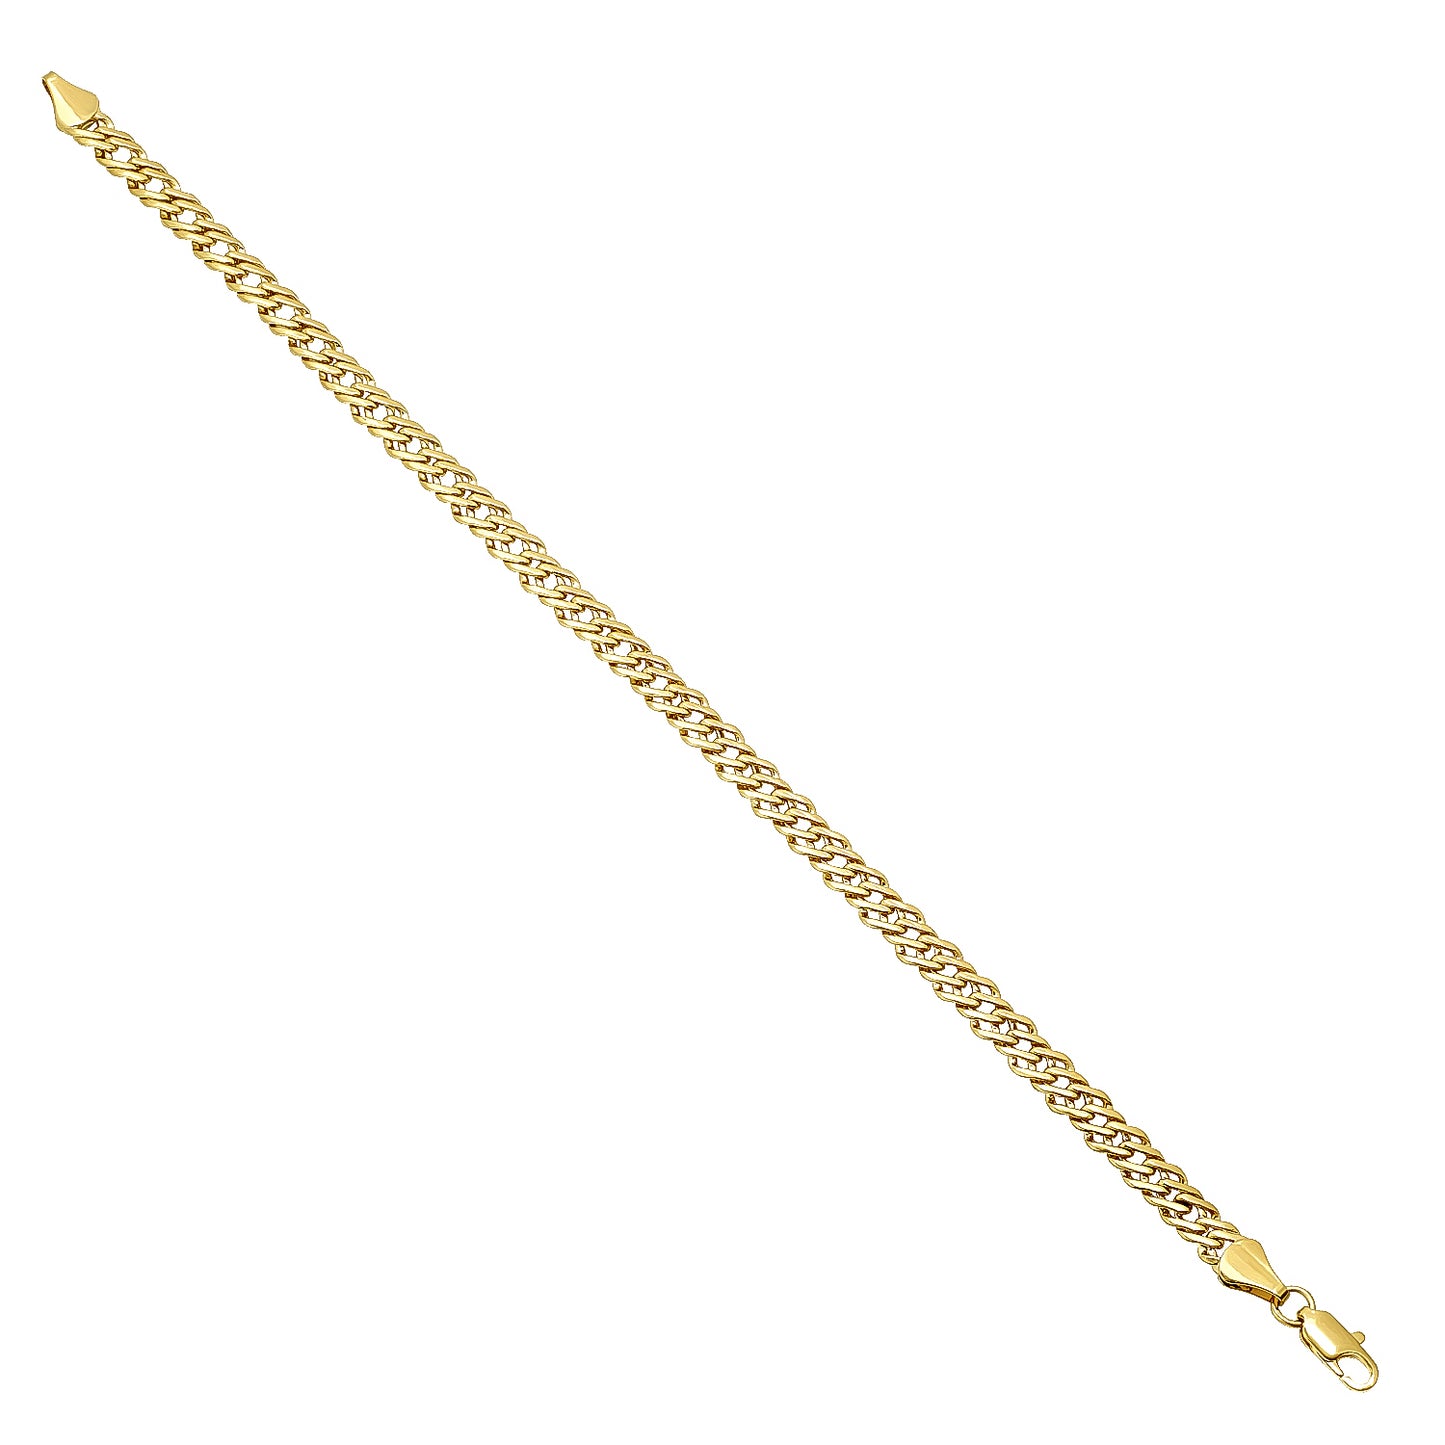 5mm 14k Yellow Gold Plated Cable Venetian Chain Bracelet (SKU: GL-061AB)